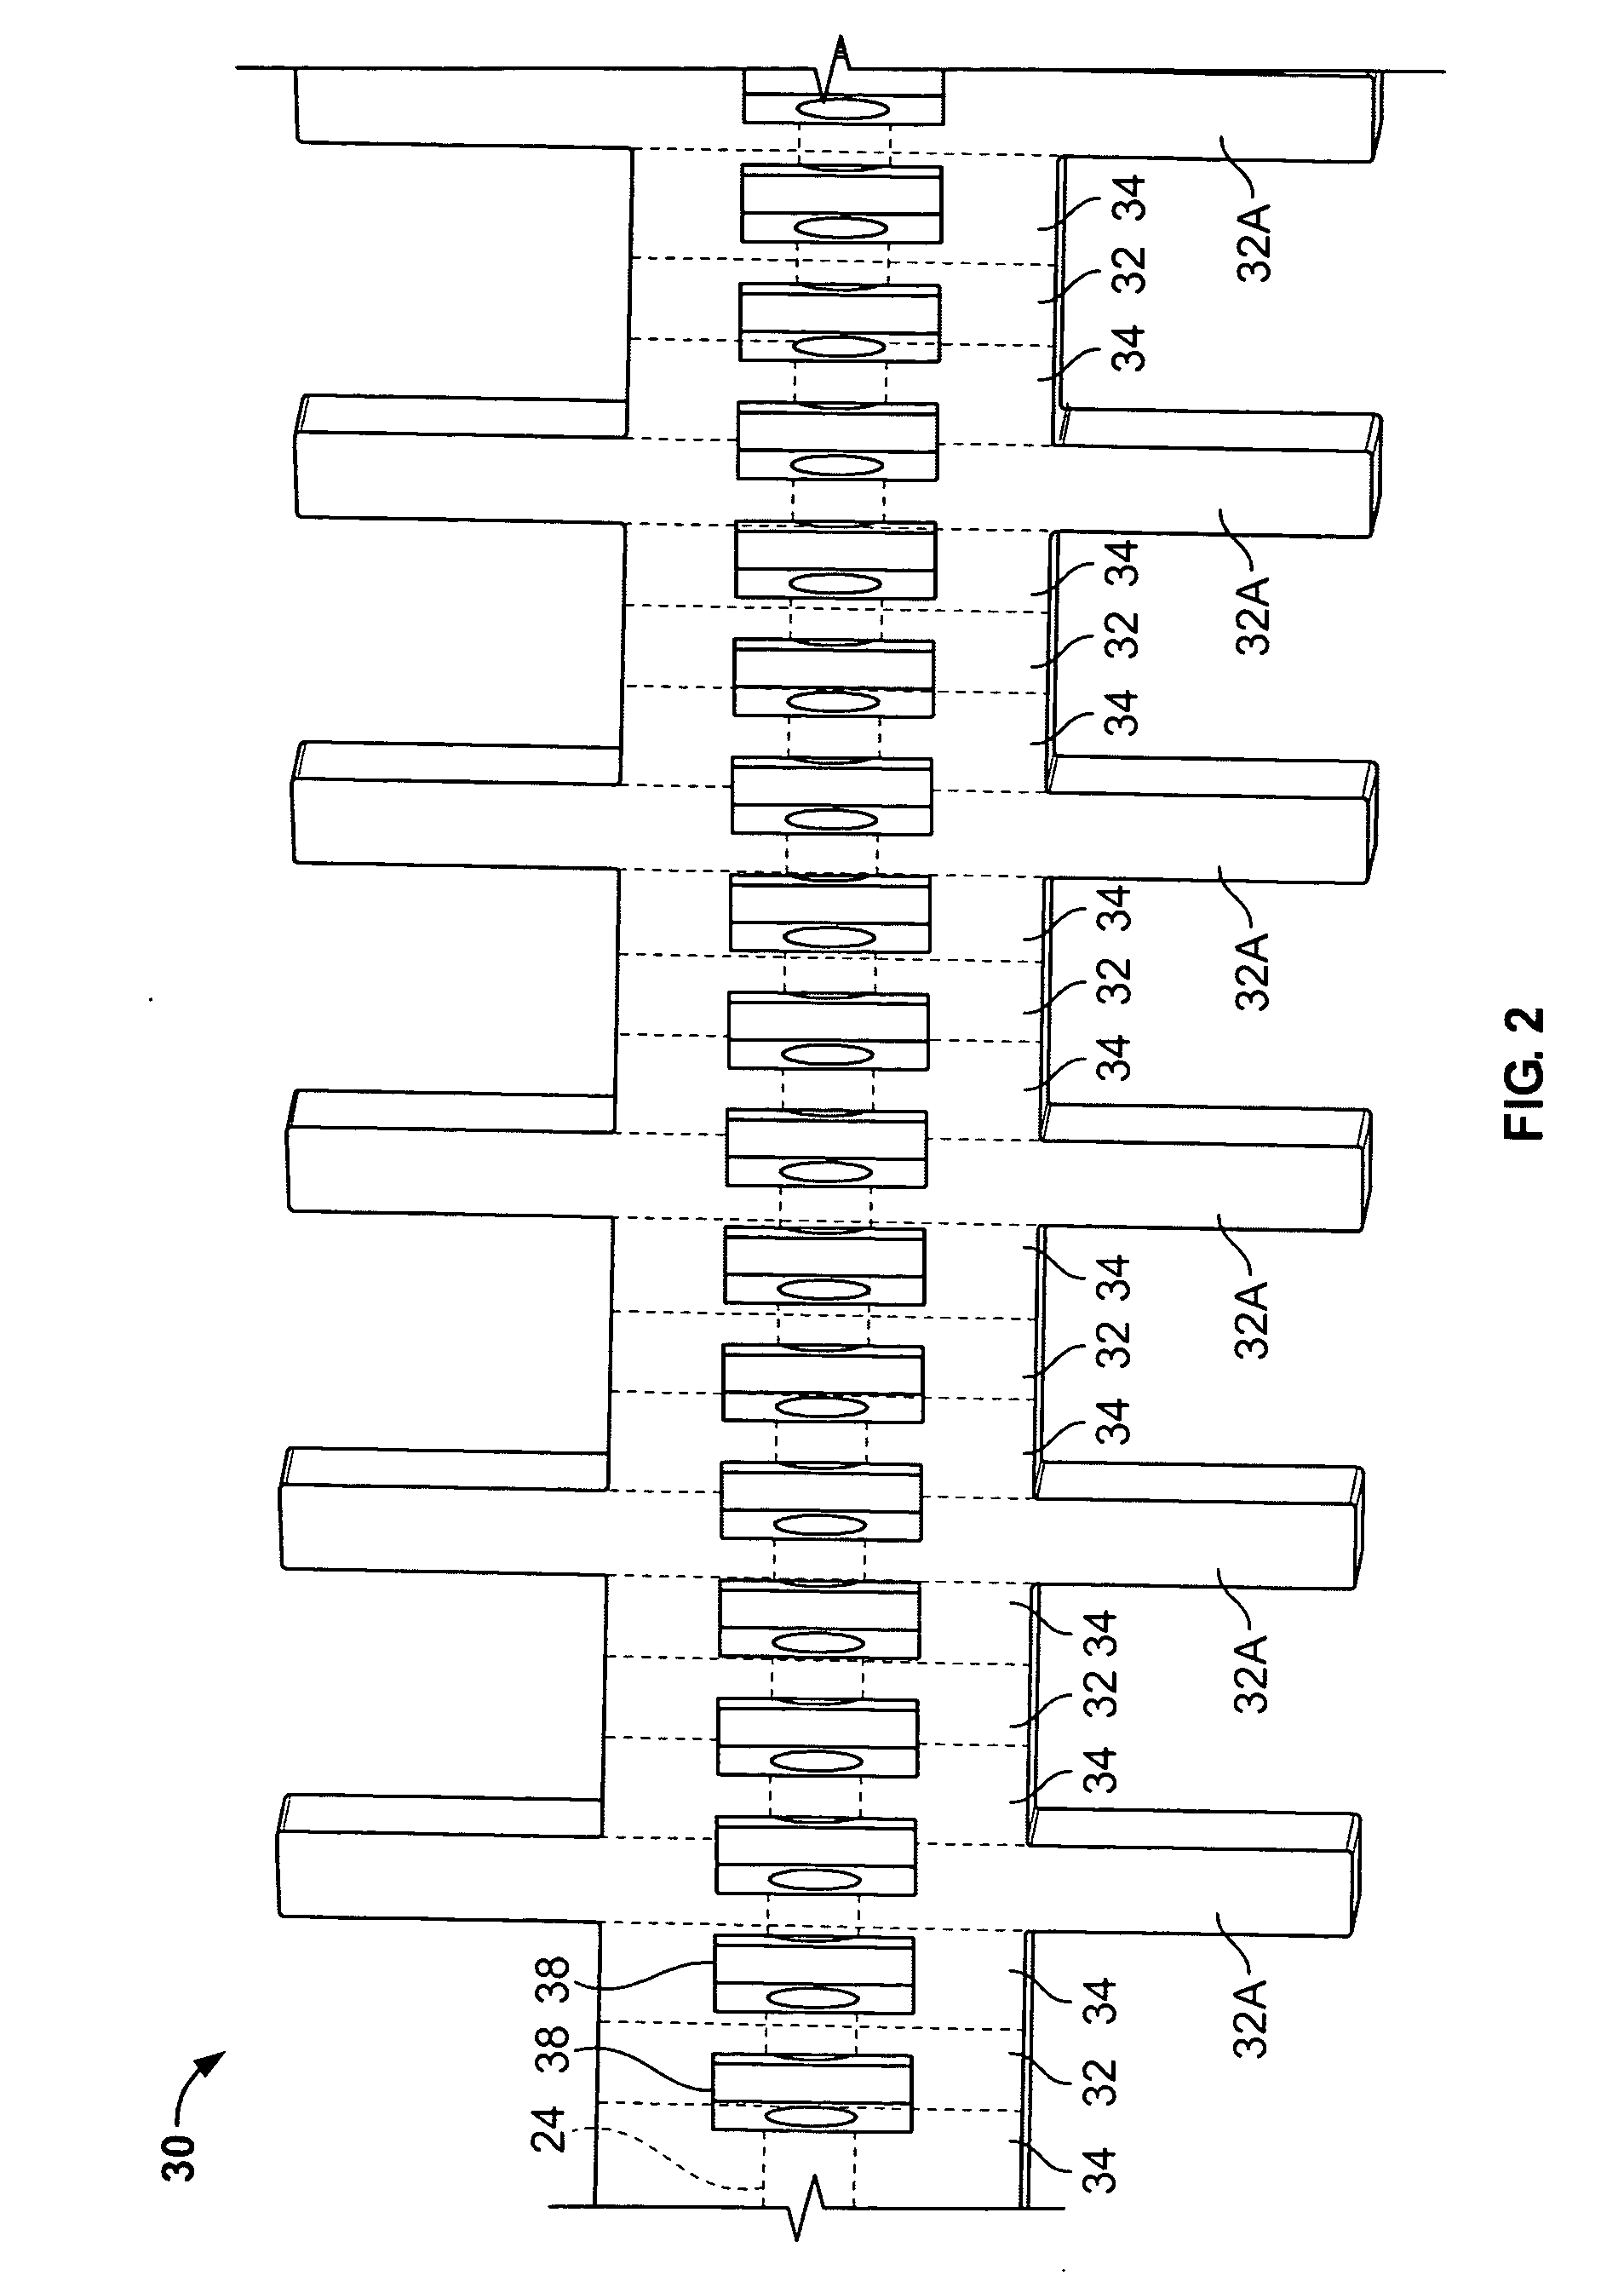 Folded waveguide traveling wave tube having polepiece-cavity coupled-cavity circuit